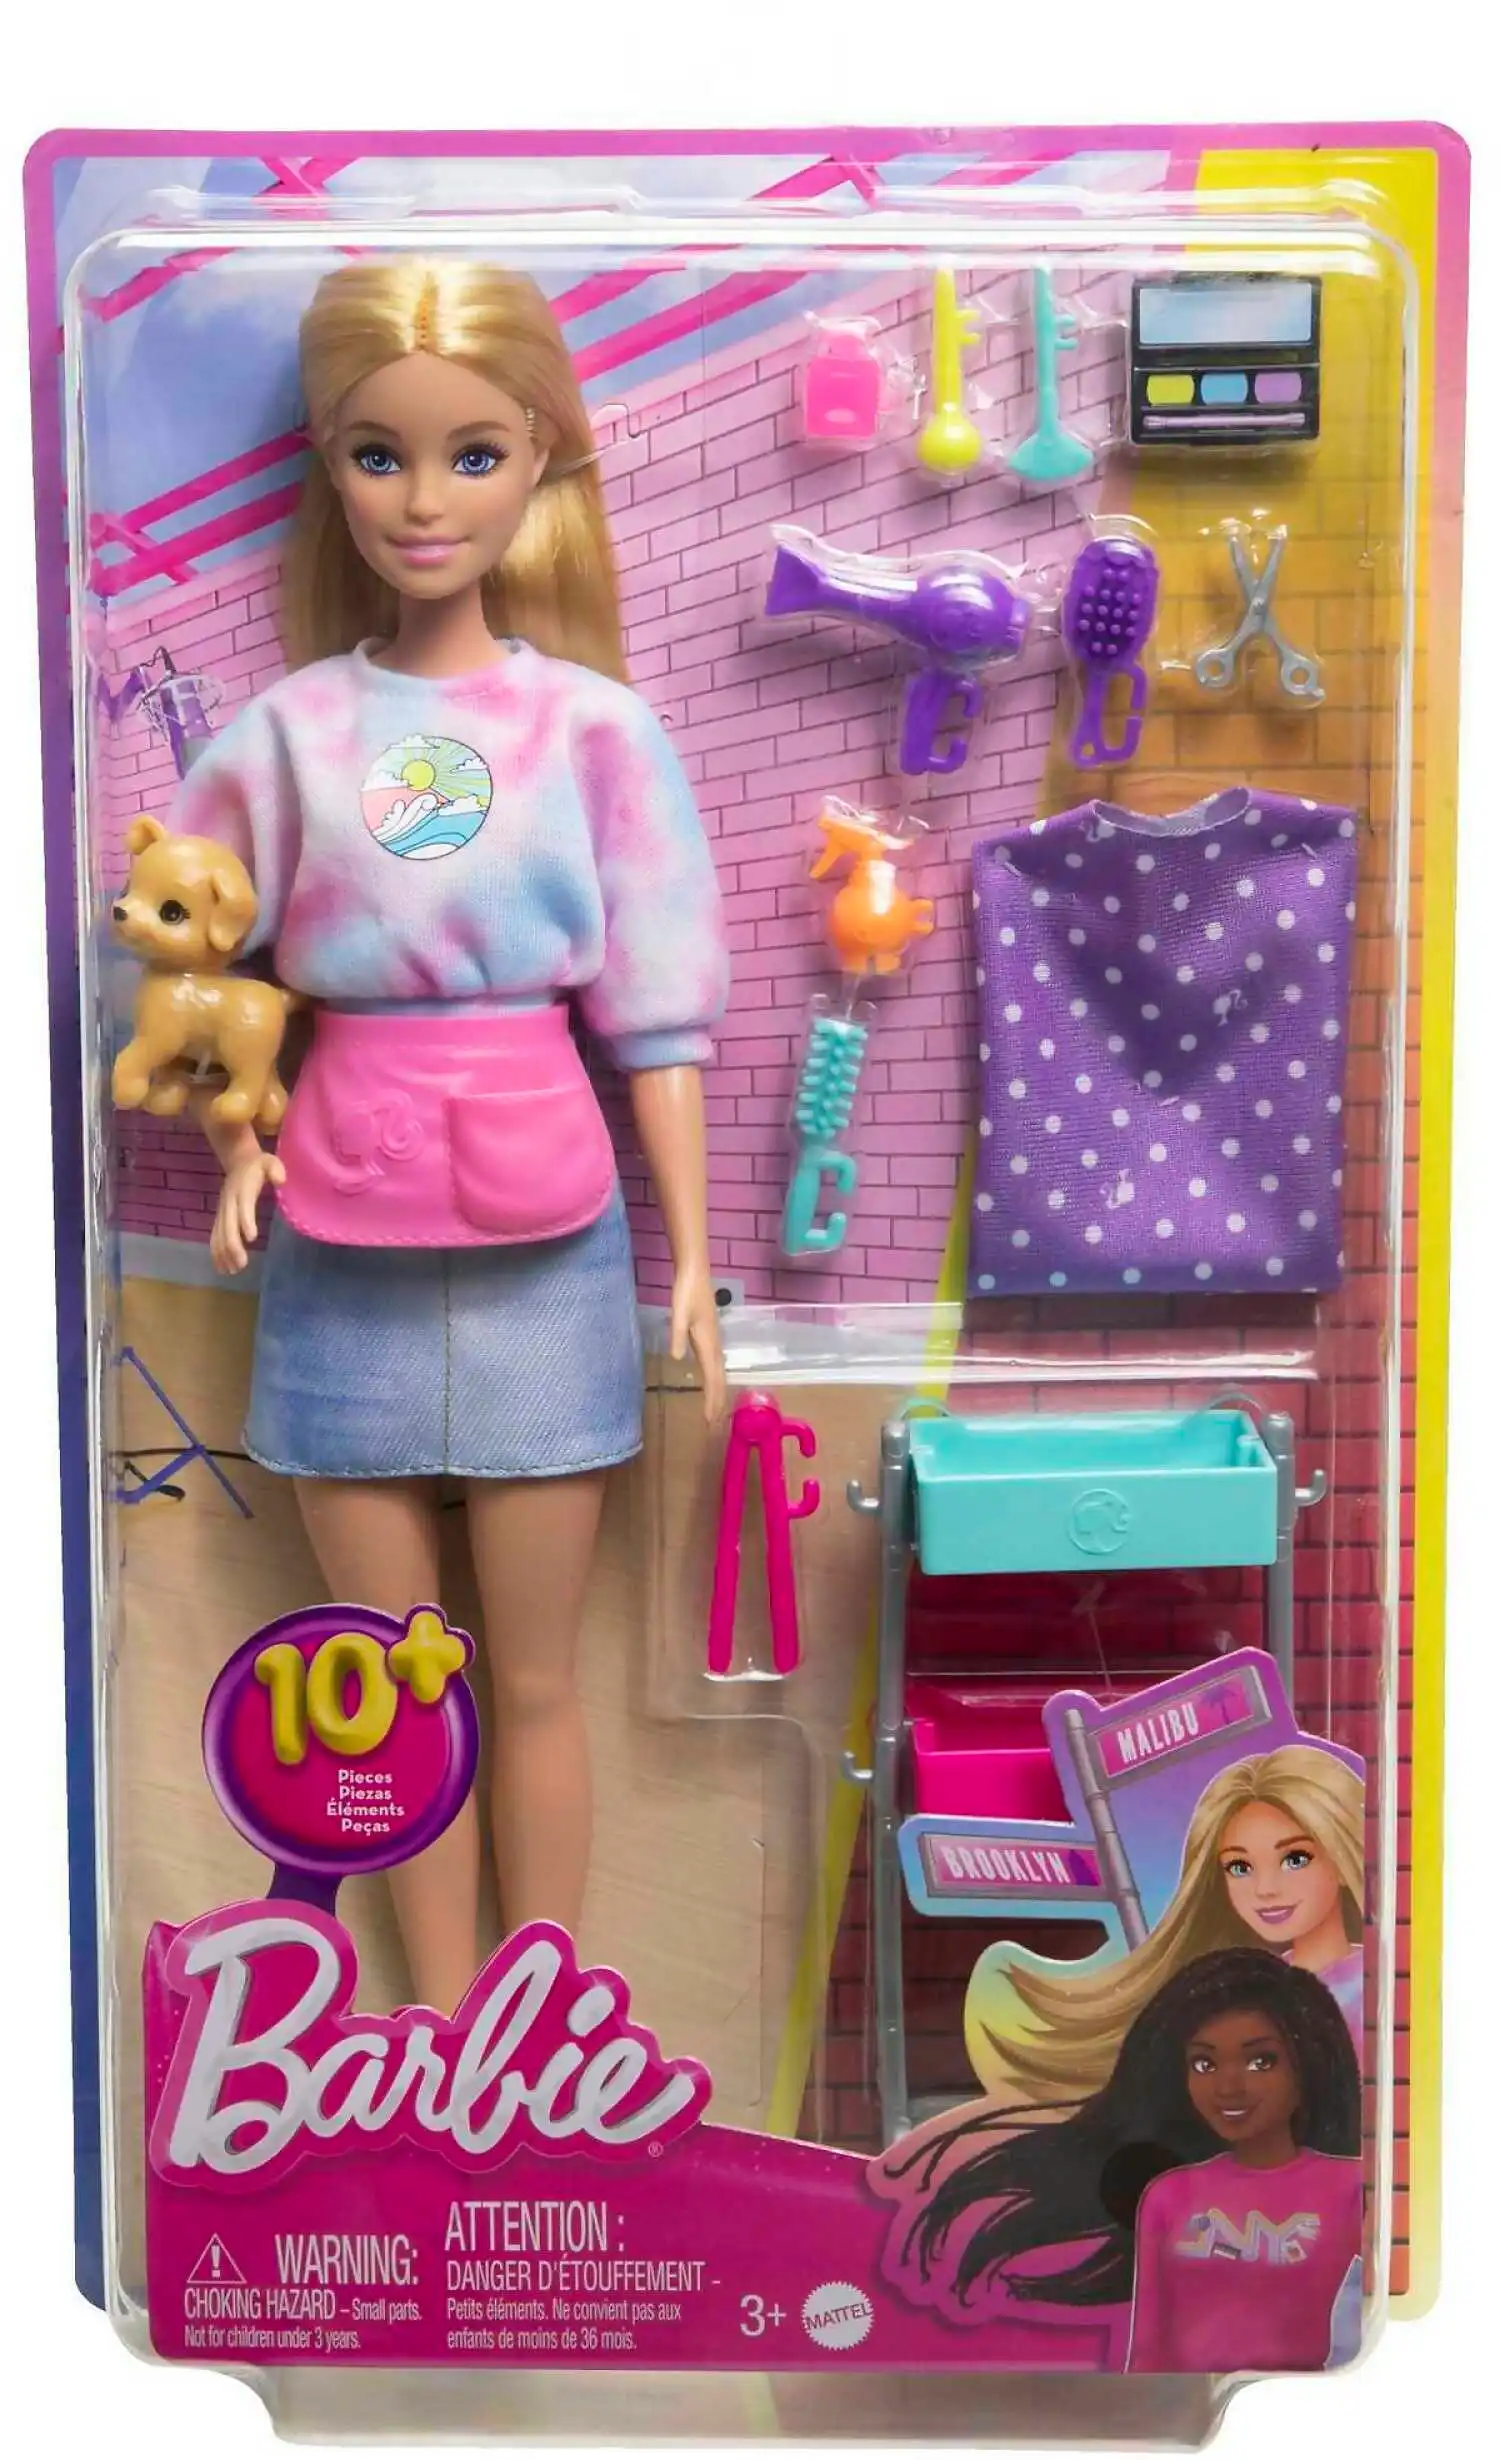 Barbie - “malibu” Stylist Doll & 14 Accessories Playset Hair & Makeup Theme With Puppy & Styling Cart - Mattel